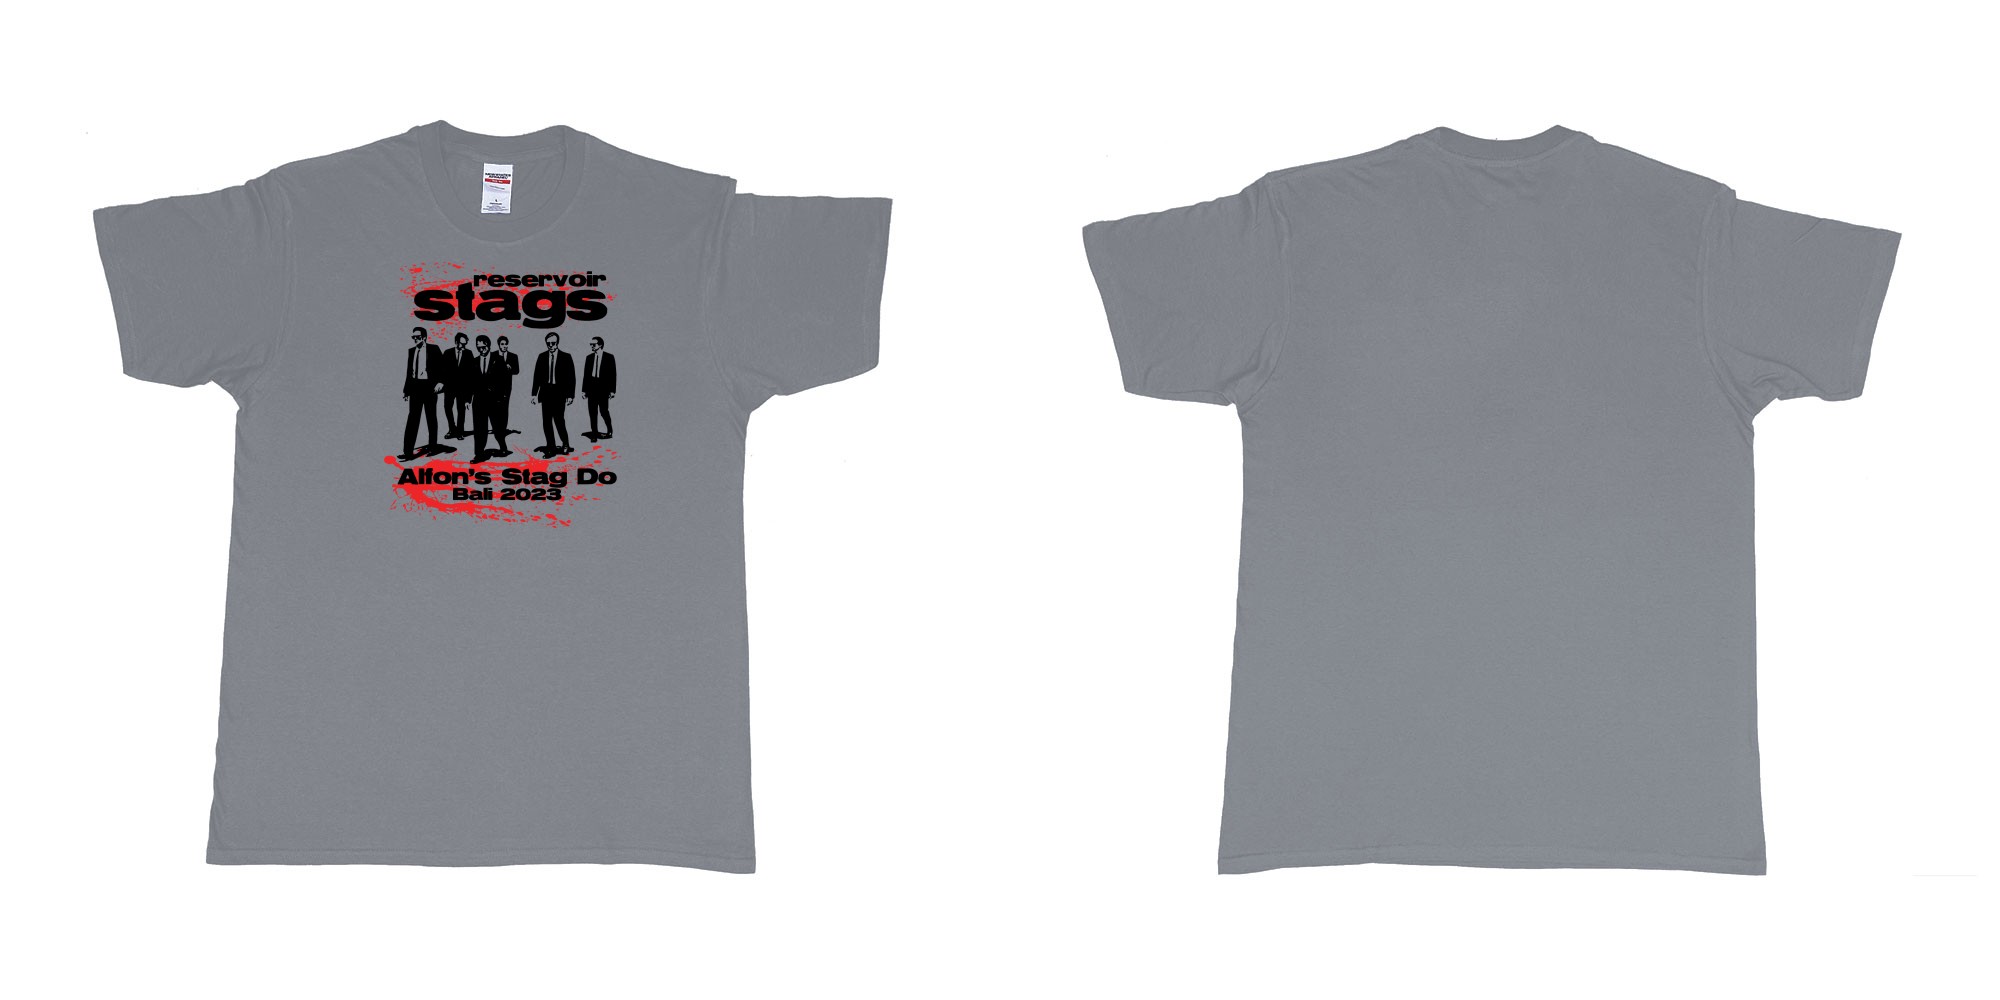 Custom tshirt design Reservoir Dogs Stag in fabric color misty choice your own text made in Bali by The Pirate Way